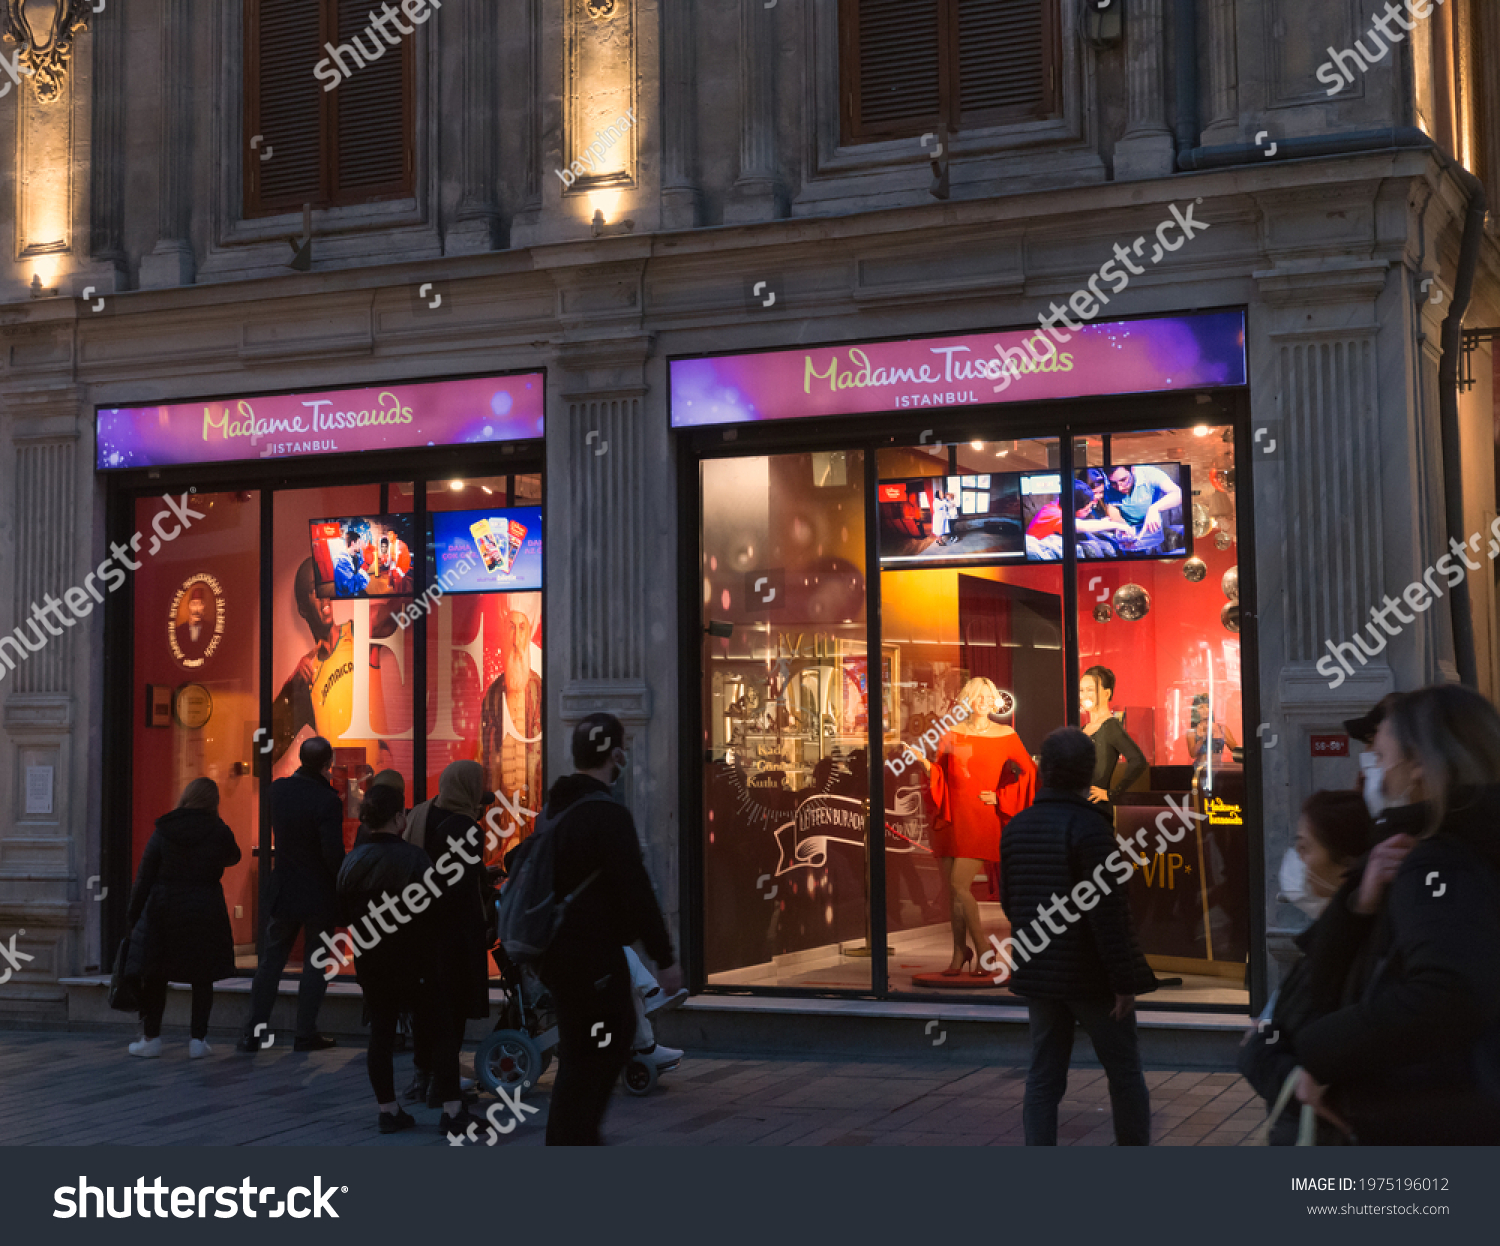 354 Madame tussauds istanbul Images, Stock Photos & Vectors | Shutterstock